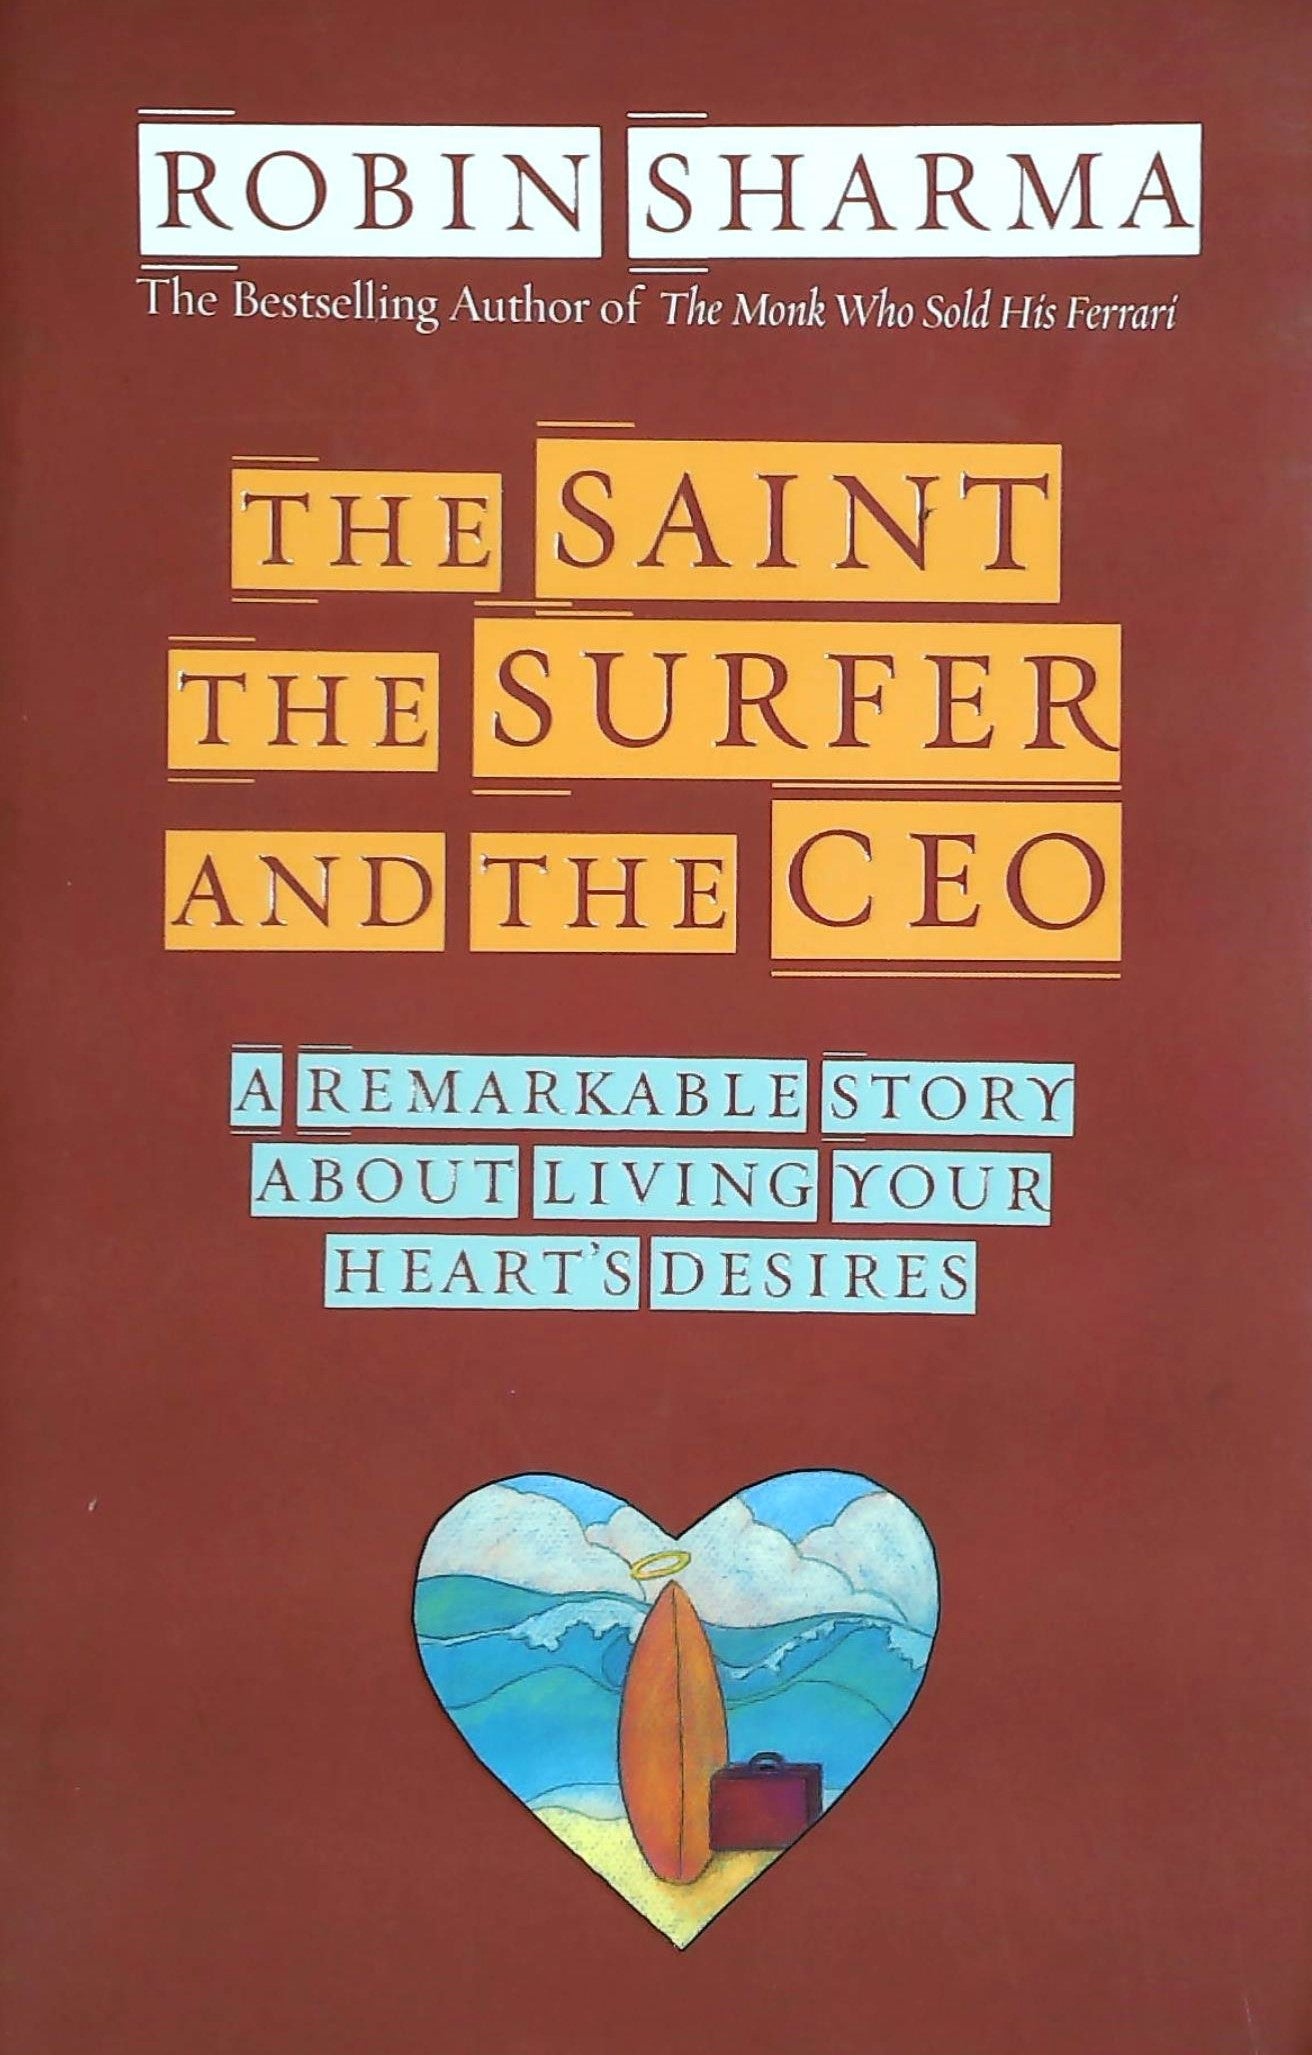 Livre ISBN 1401900593 The Saint the Surfer and the CEO : A Remarkable Story About Living Your Heart's Desires (Robin Shama)